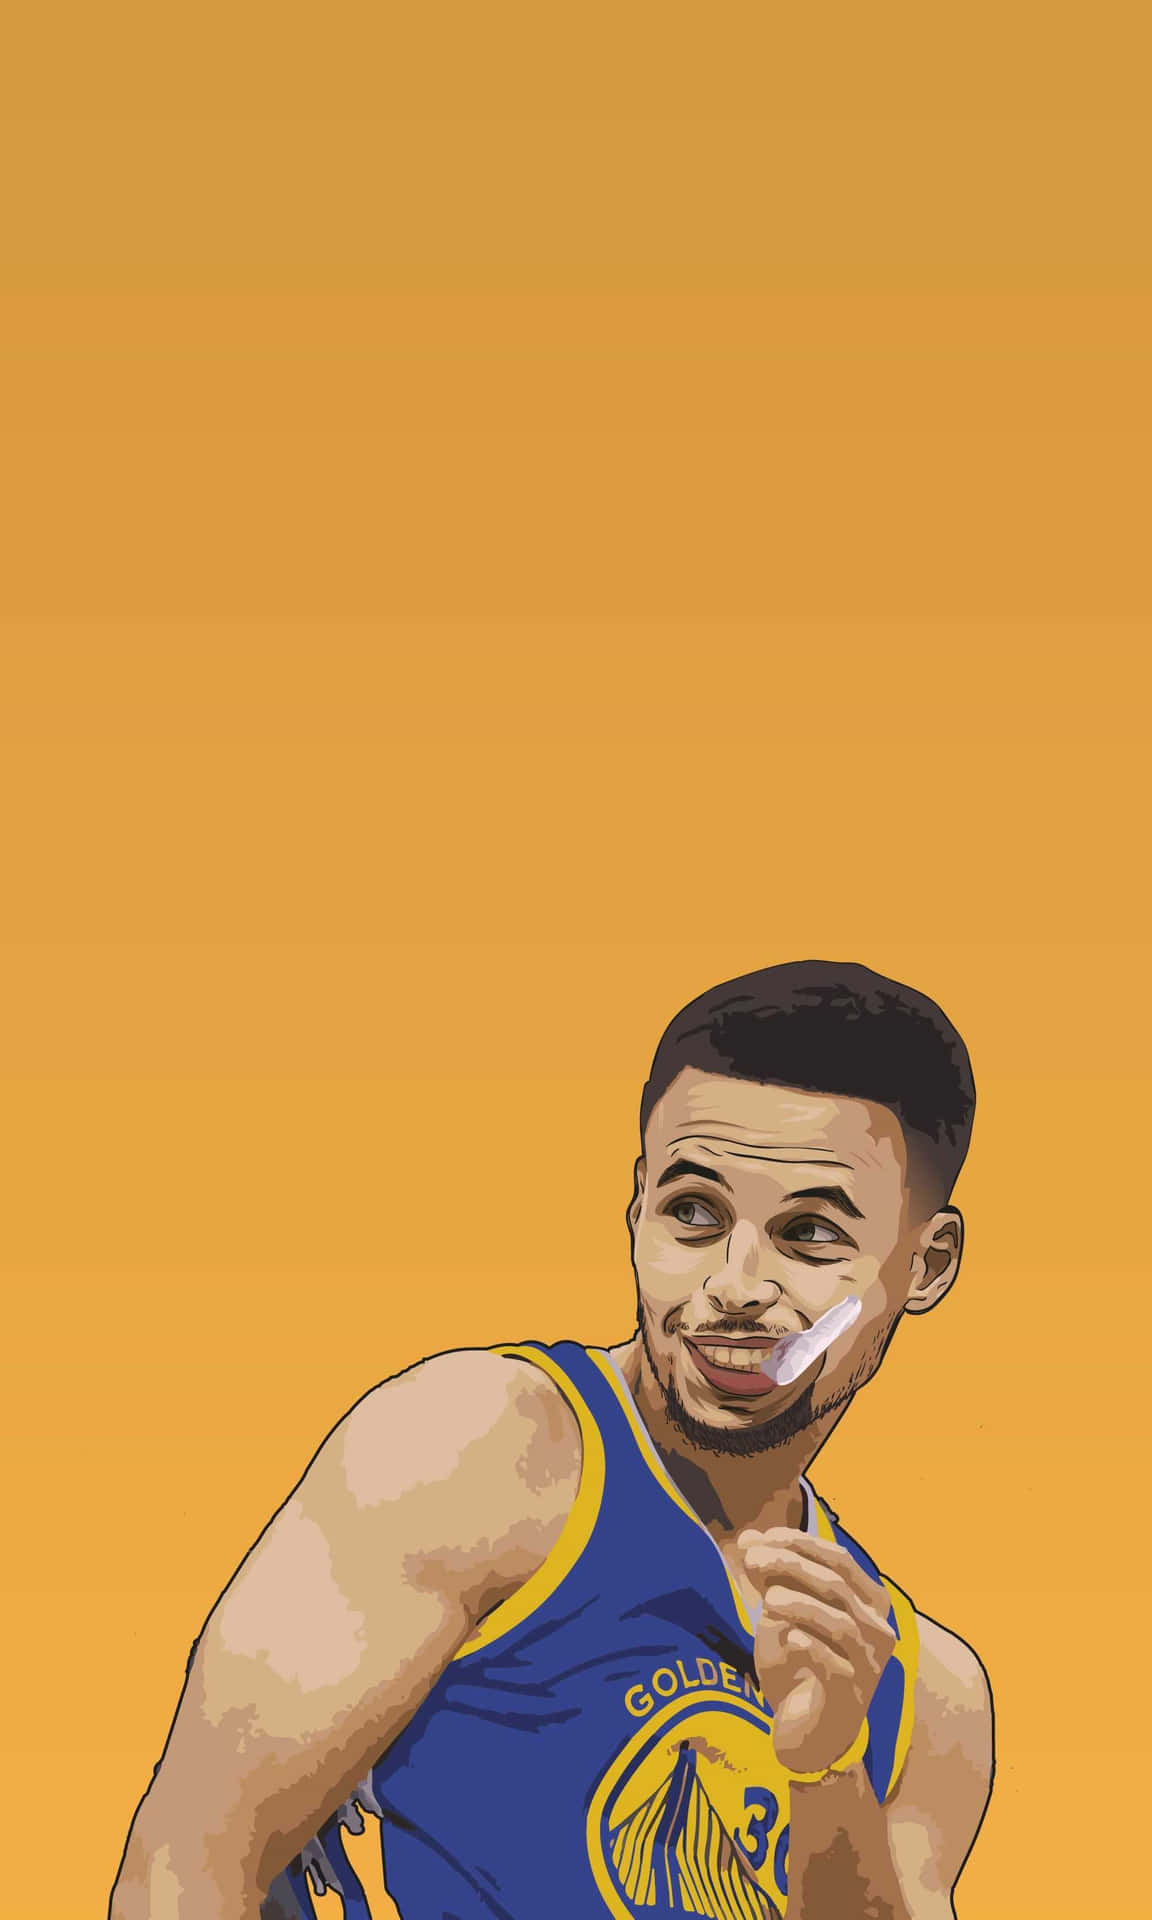 Stephen Curry dominating on the court Wallpaper